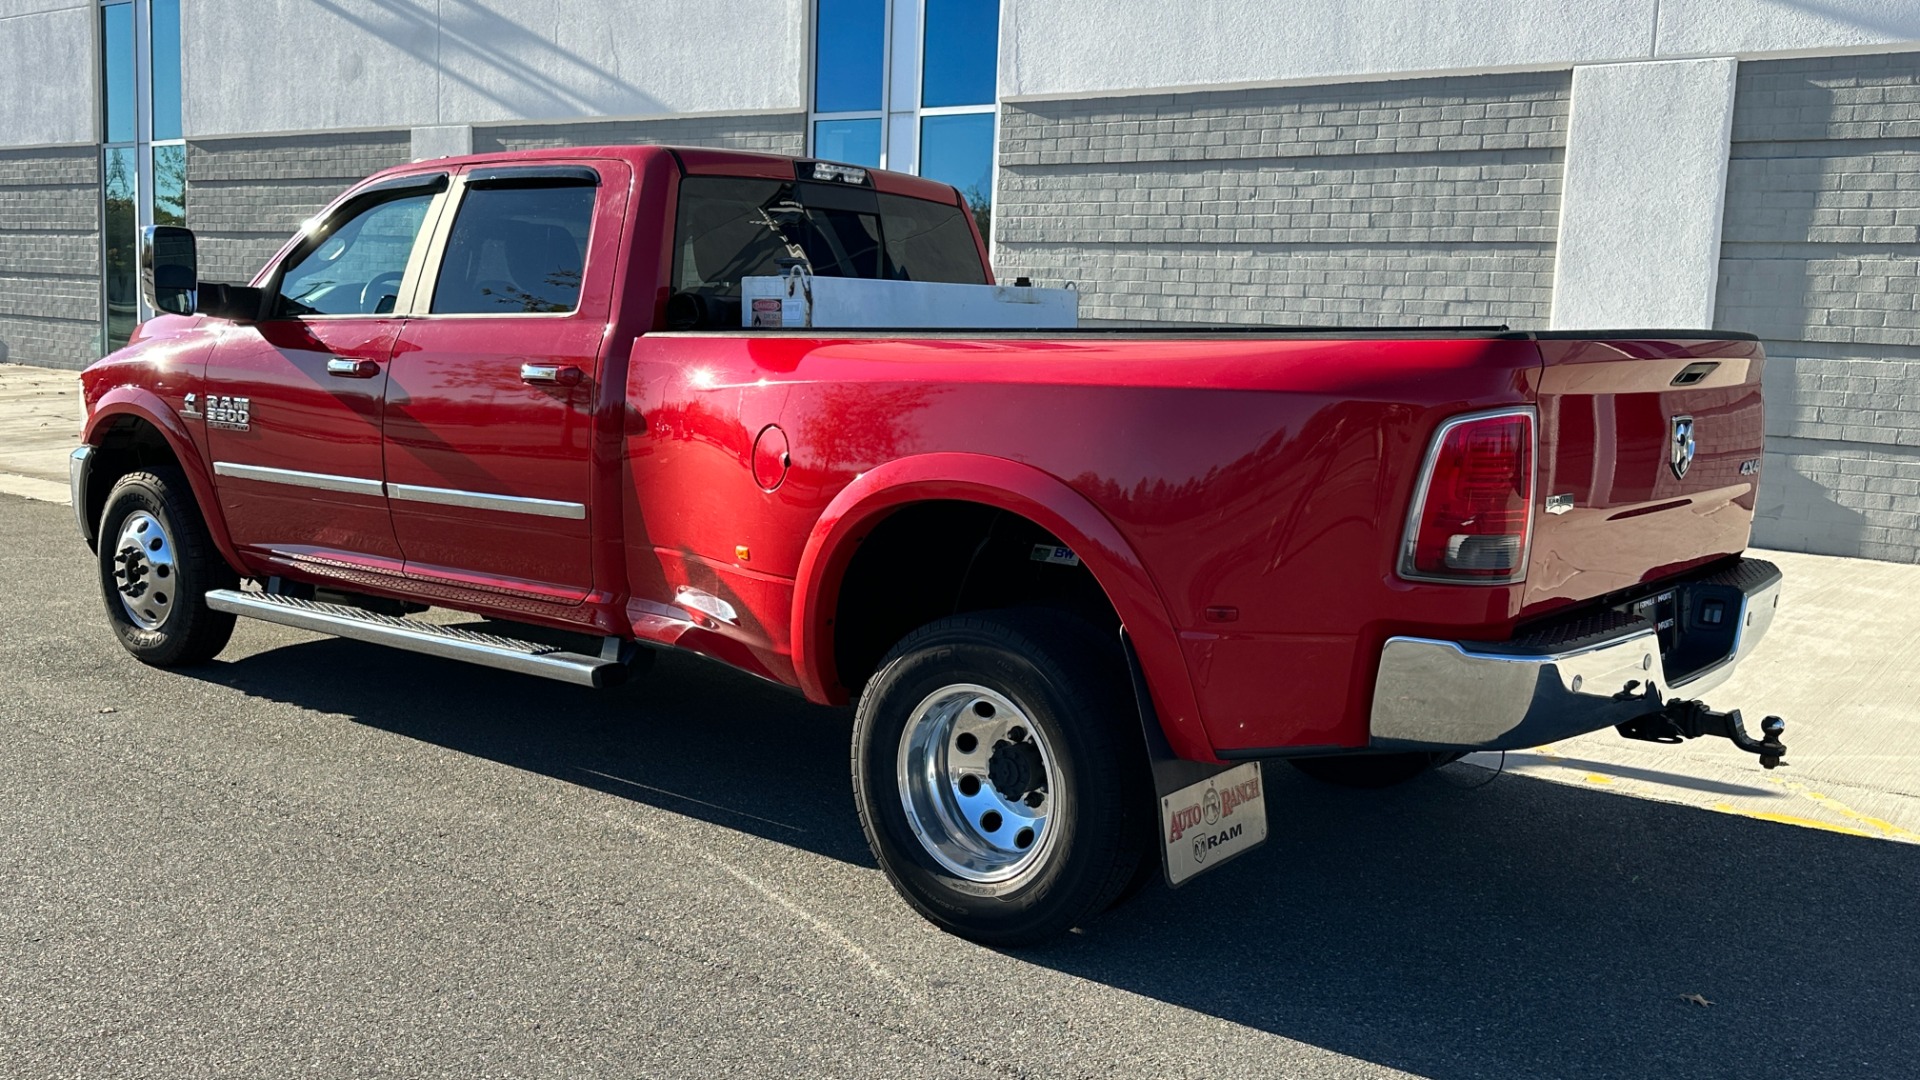 Used 2017 Ram 3500 LARAMIE / TURBO DIESEL / AISIN TRANSMISSION / DUAL REAR WHEELS / 4X4 / CREW for sale $45,995 at Formula Imports in Charlotte NC 28227 4